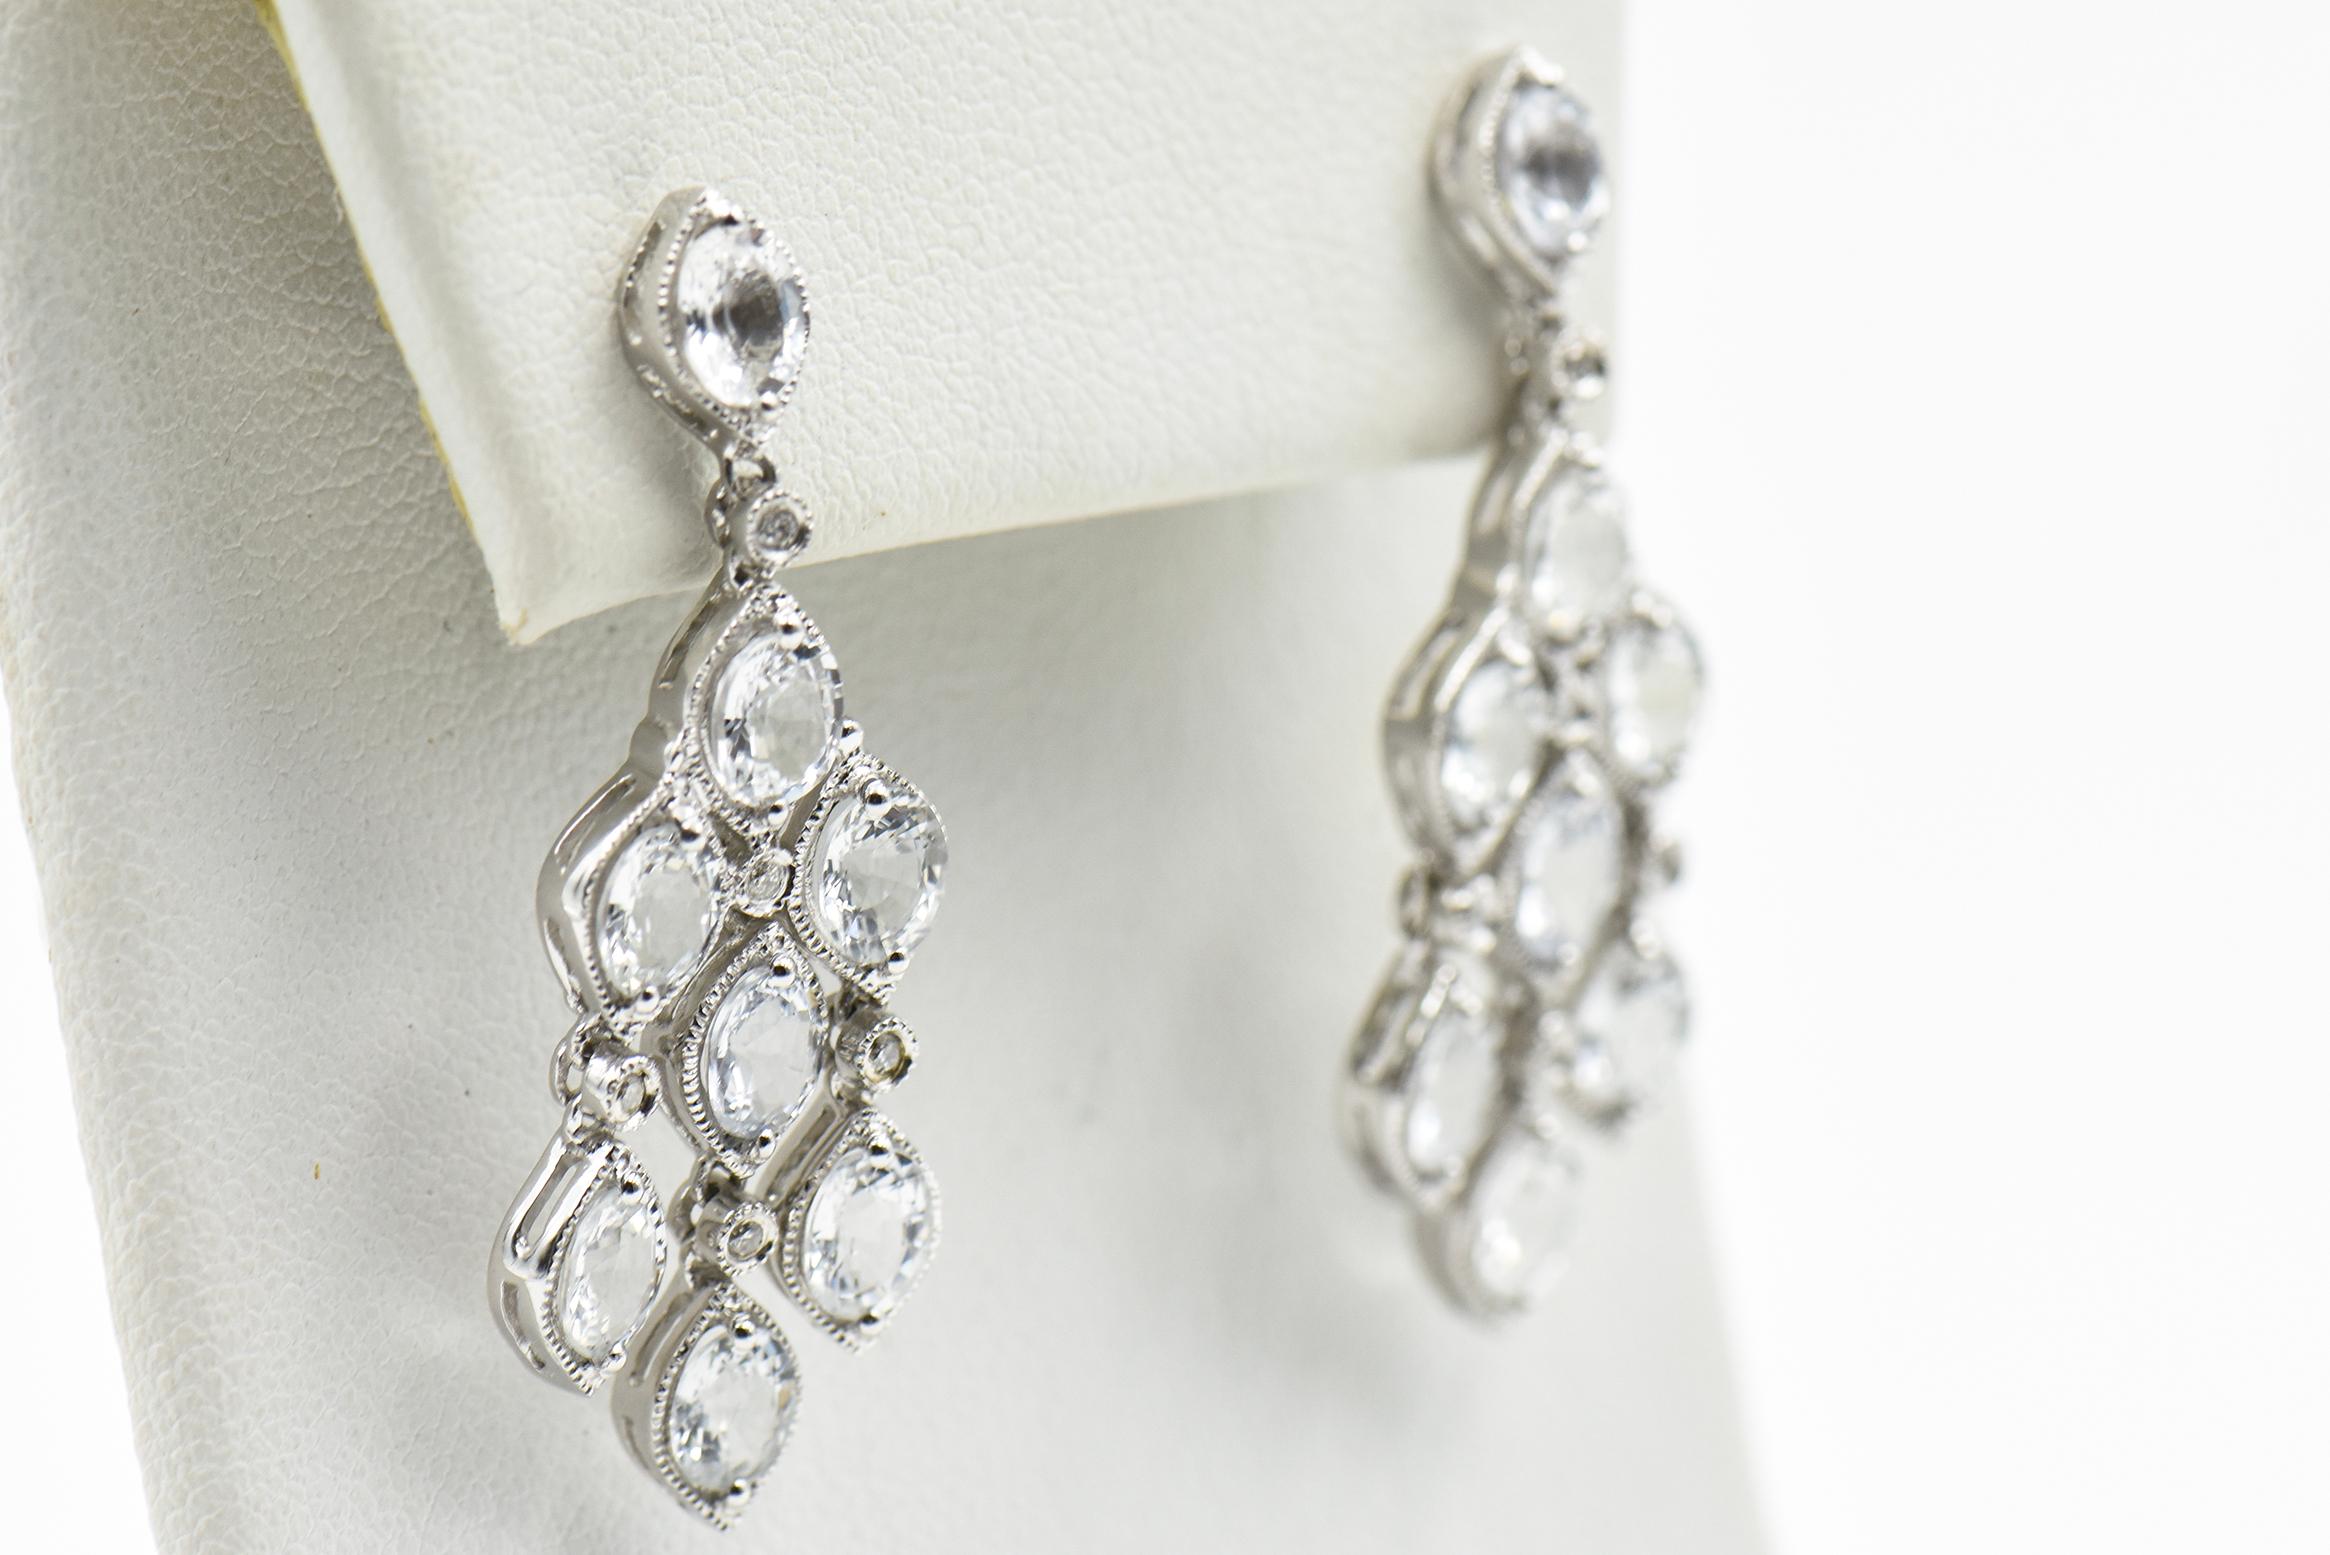 18k White gold chandelier style dangling earrings with CZs.  Perfect for a black tie function.